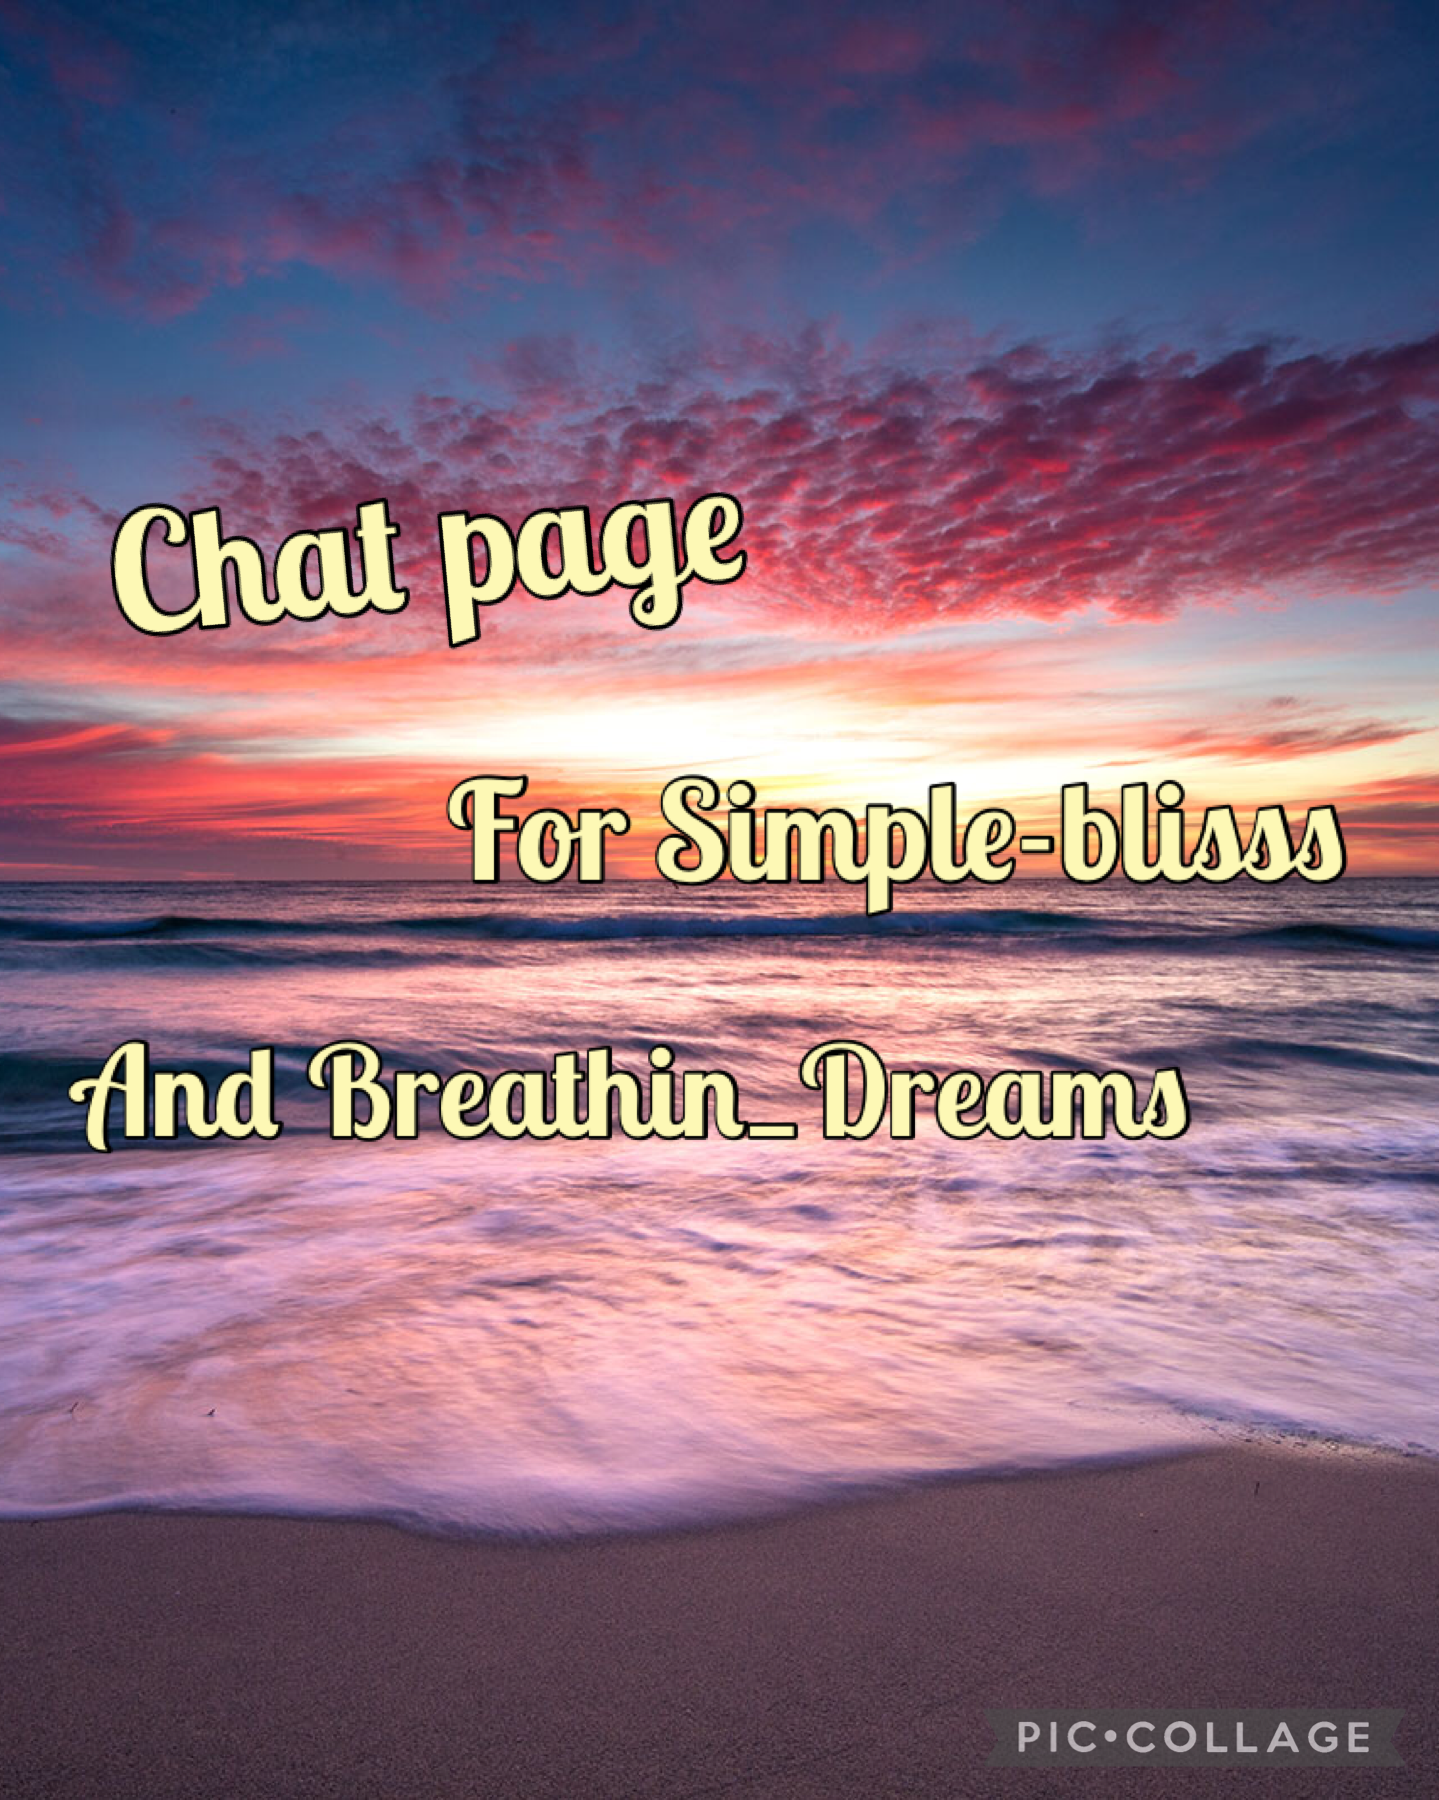 28.4.22 Chat page with simple-bliss